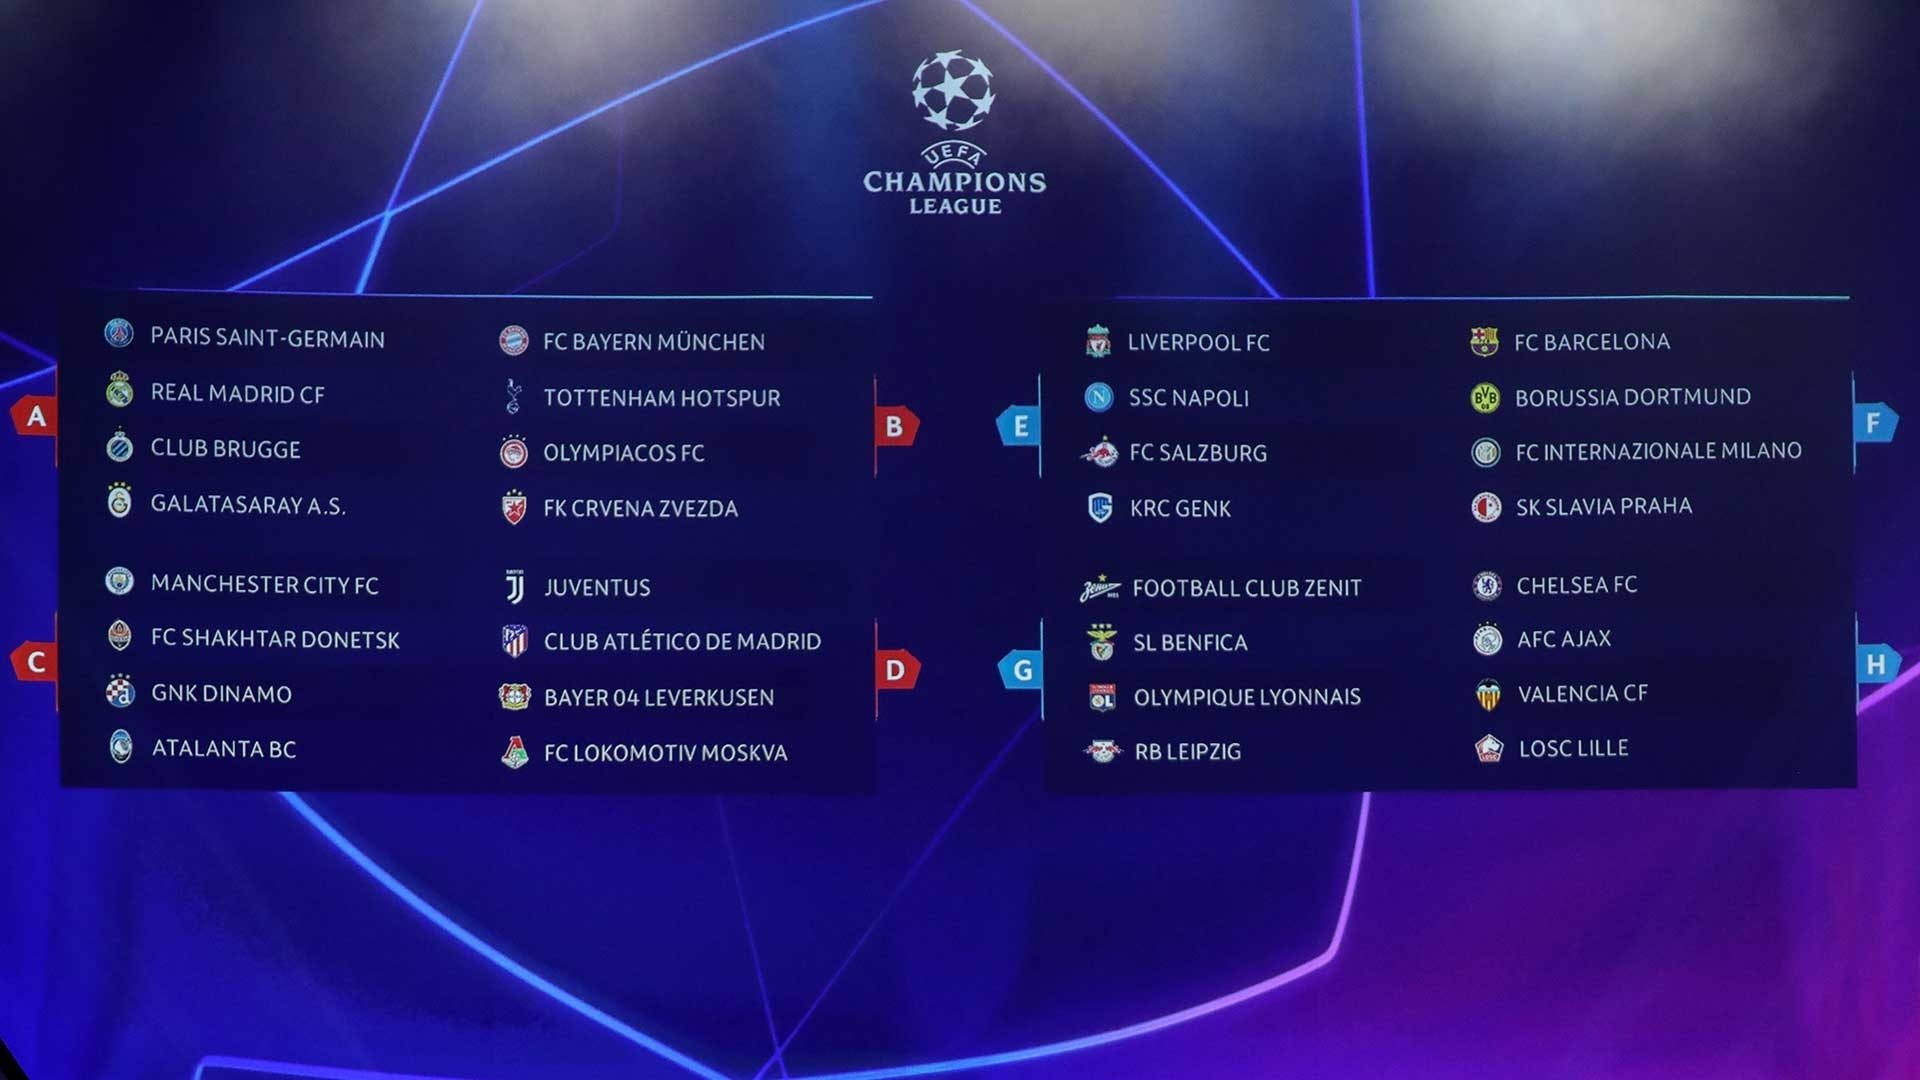 UEFA Champions League 2018/19: 3 of the toughest groups this season